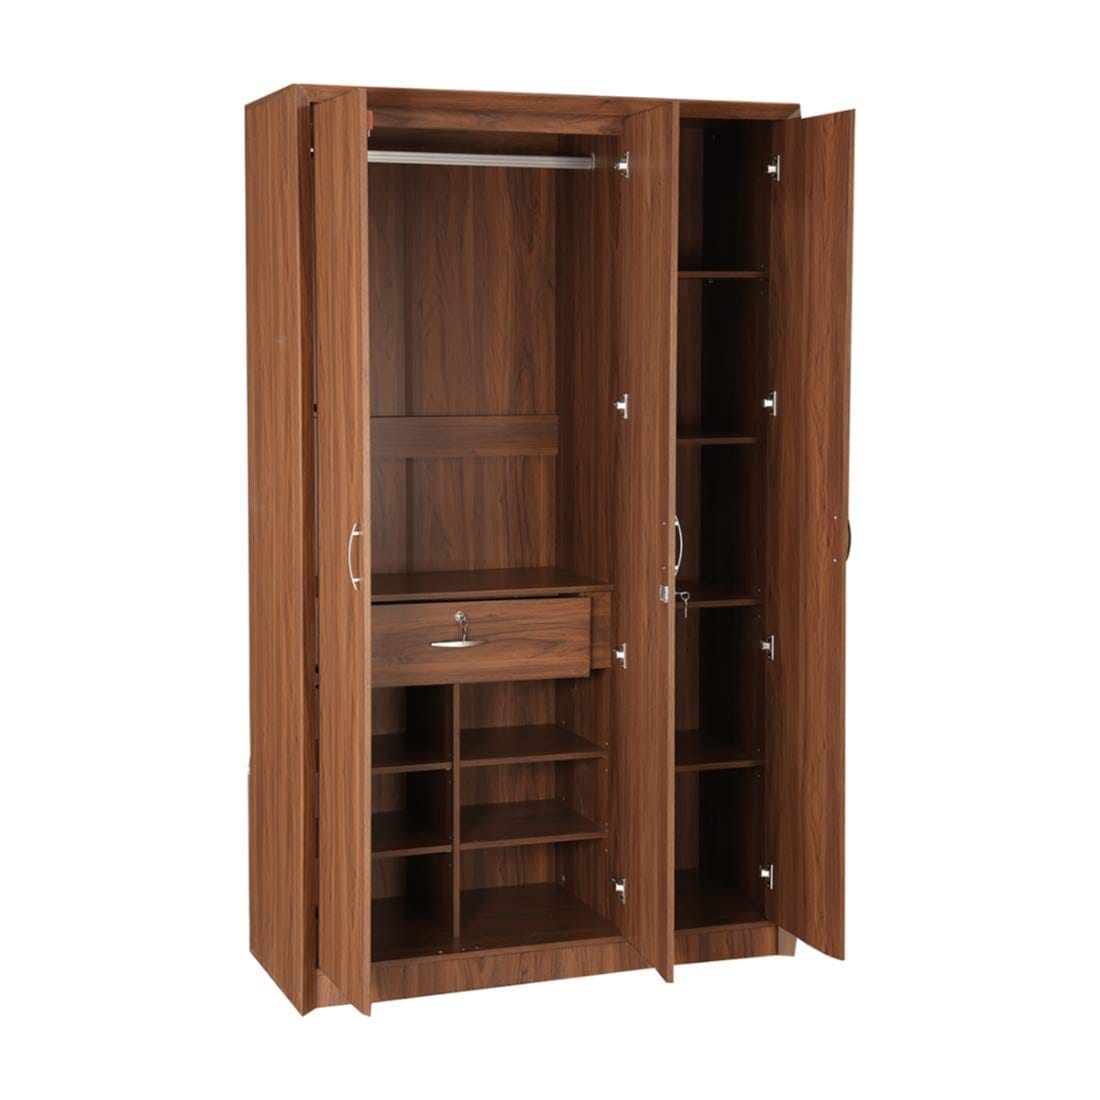 Light Brown Colour 3 Door Wardrobe, Drawer, Shelves and Hanging Space for Clothes